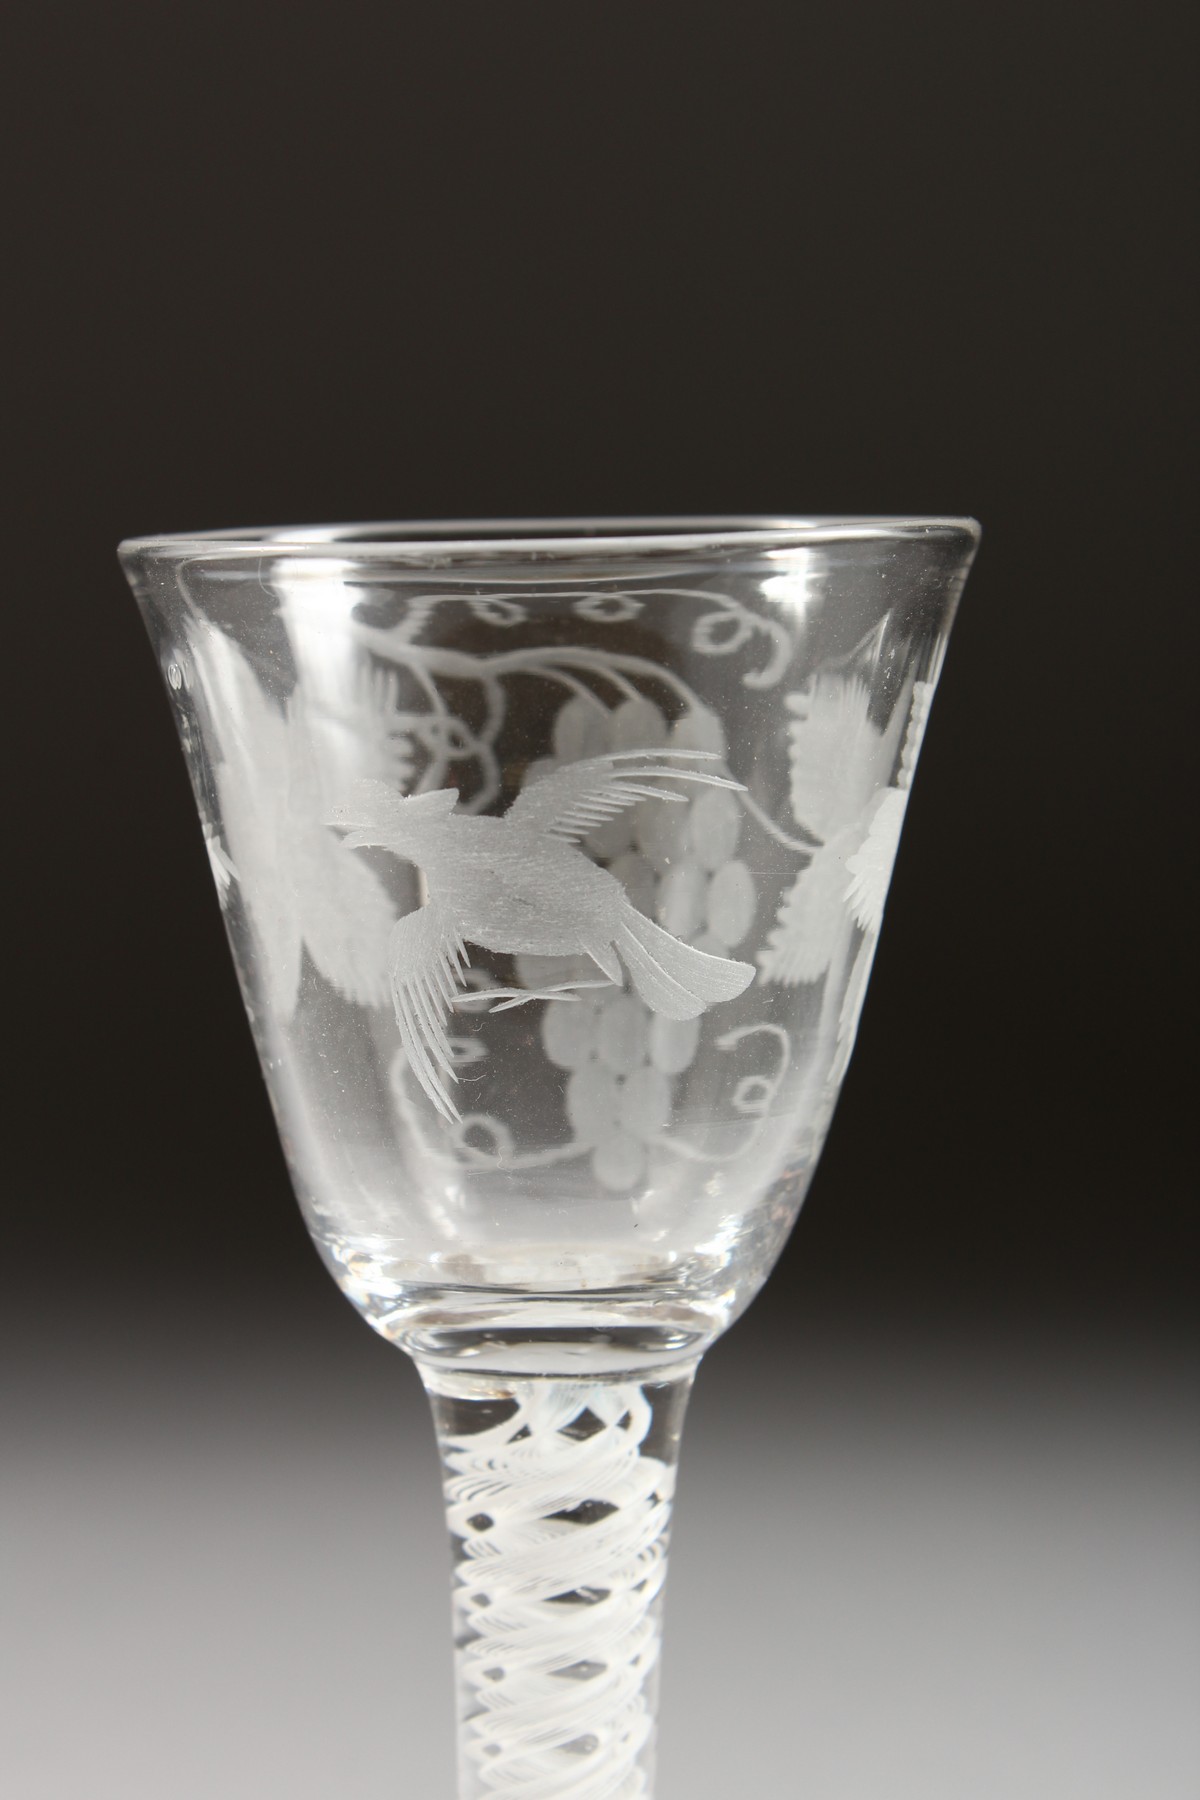 A GEORGIAN WINE GLASS, the bowl engraved with fruiting vines with white twist stem. 5.25ins high. - Image 4 of 7